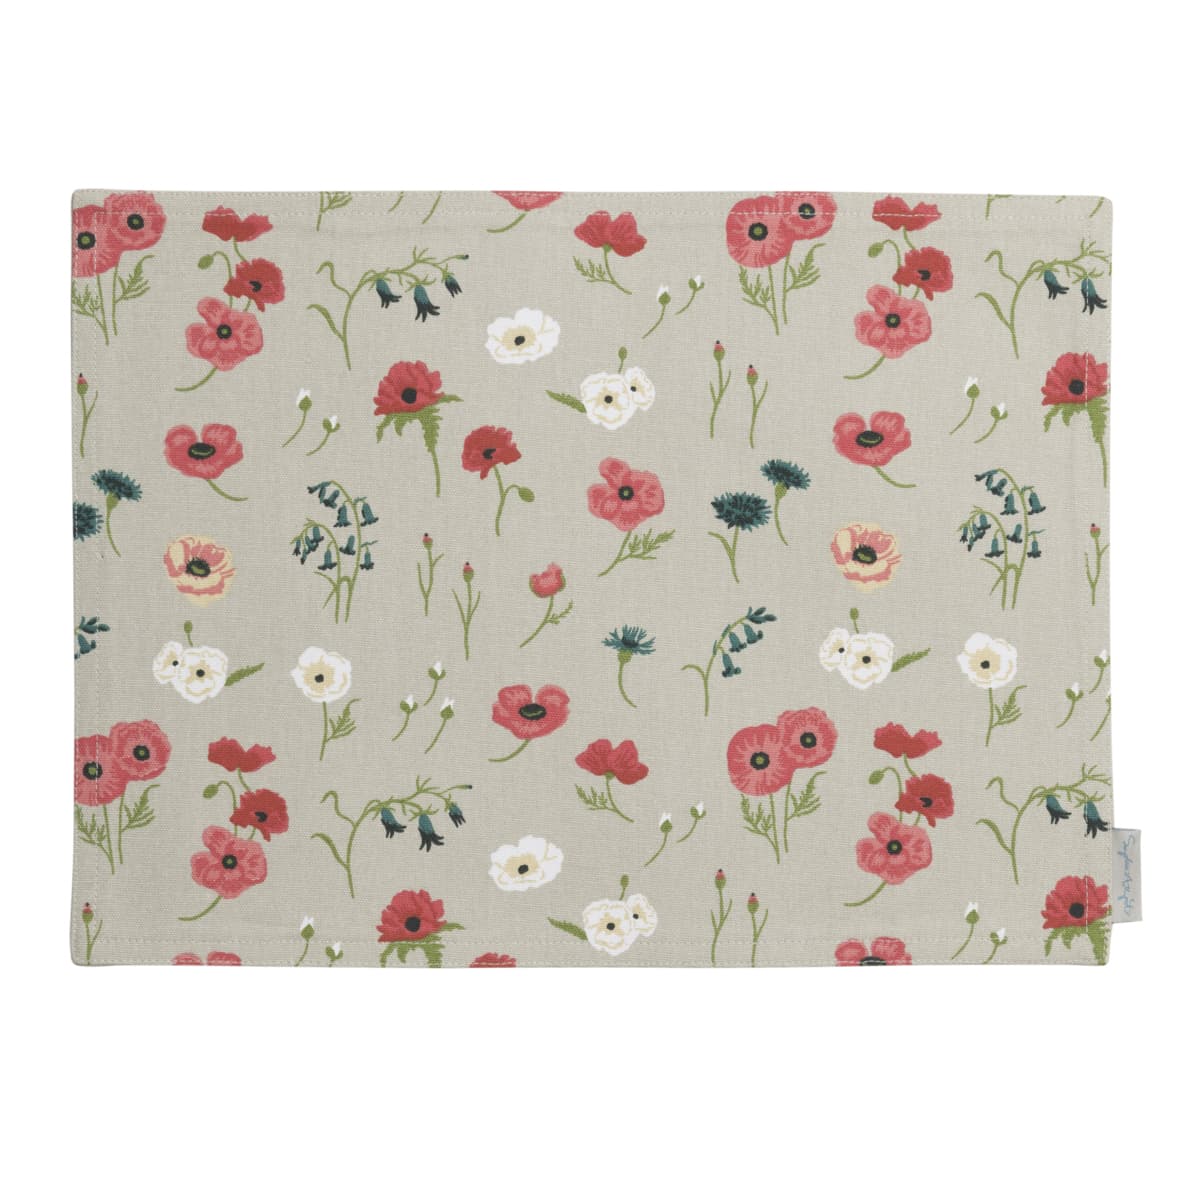 Poppy Meadow Fabric Placemat